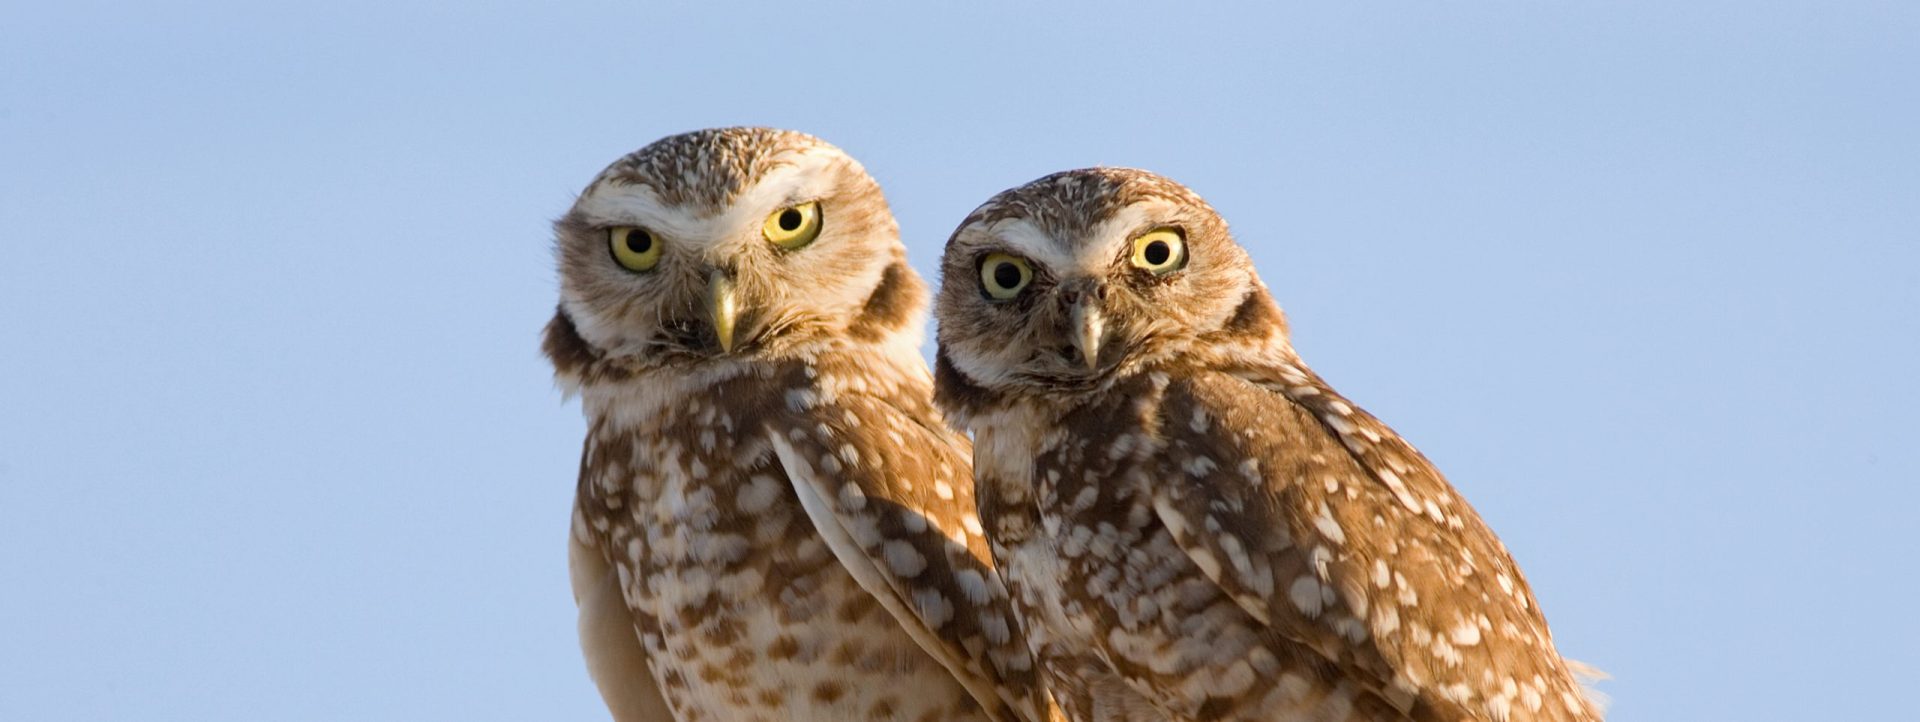 Burrowing Owl – Double Staring Contest